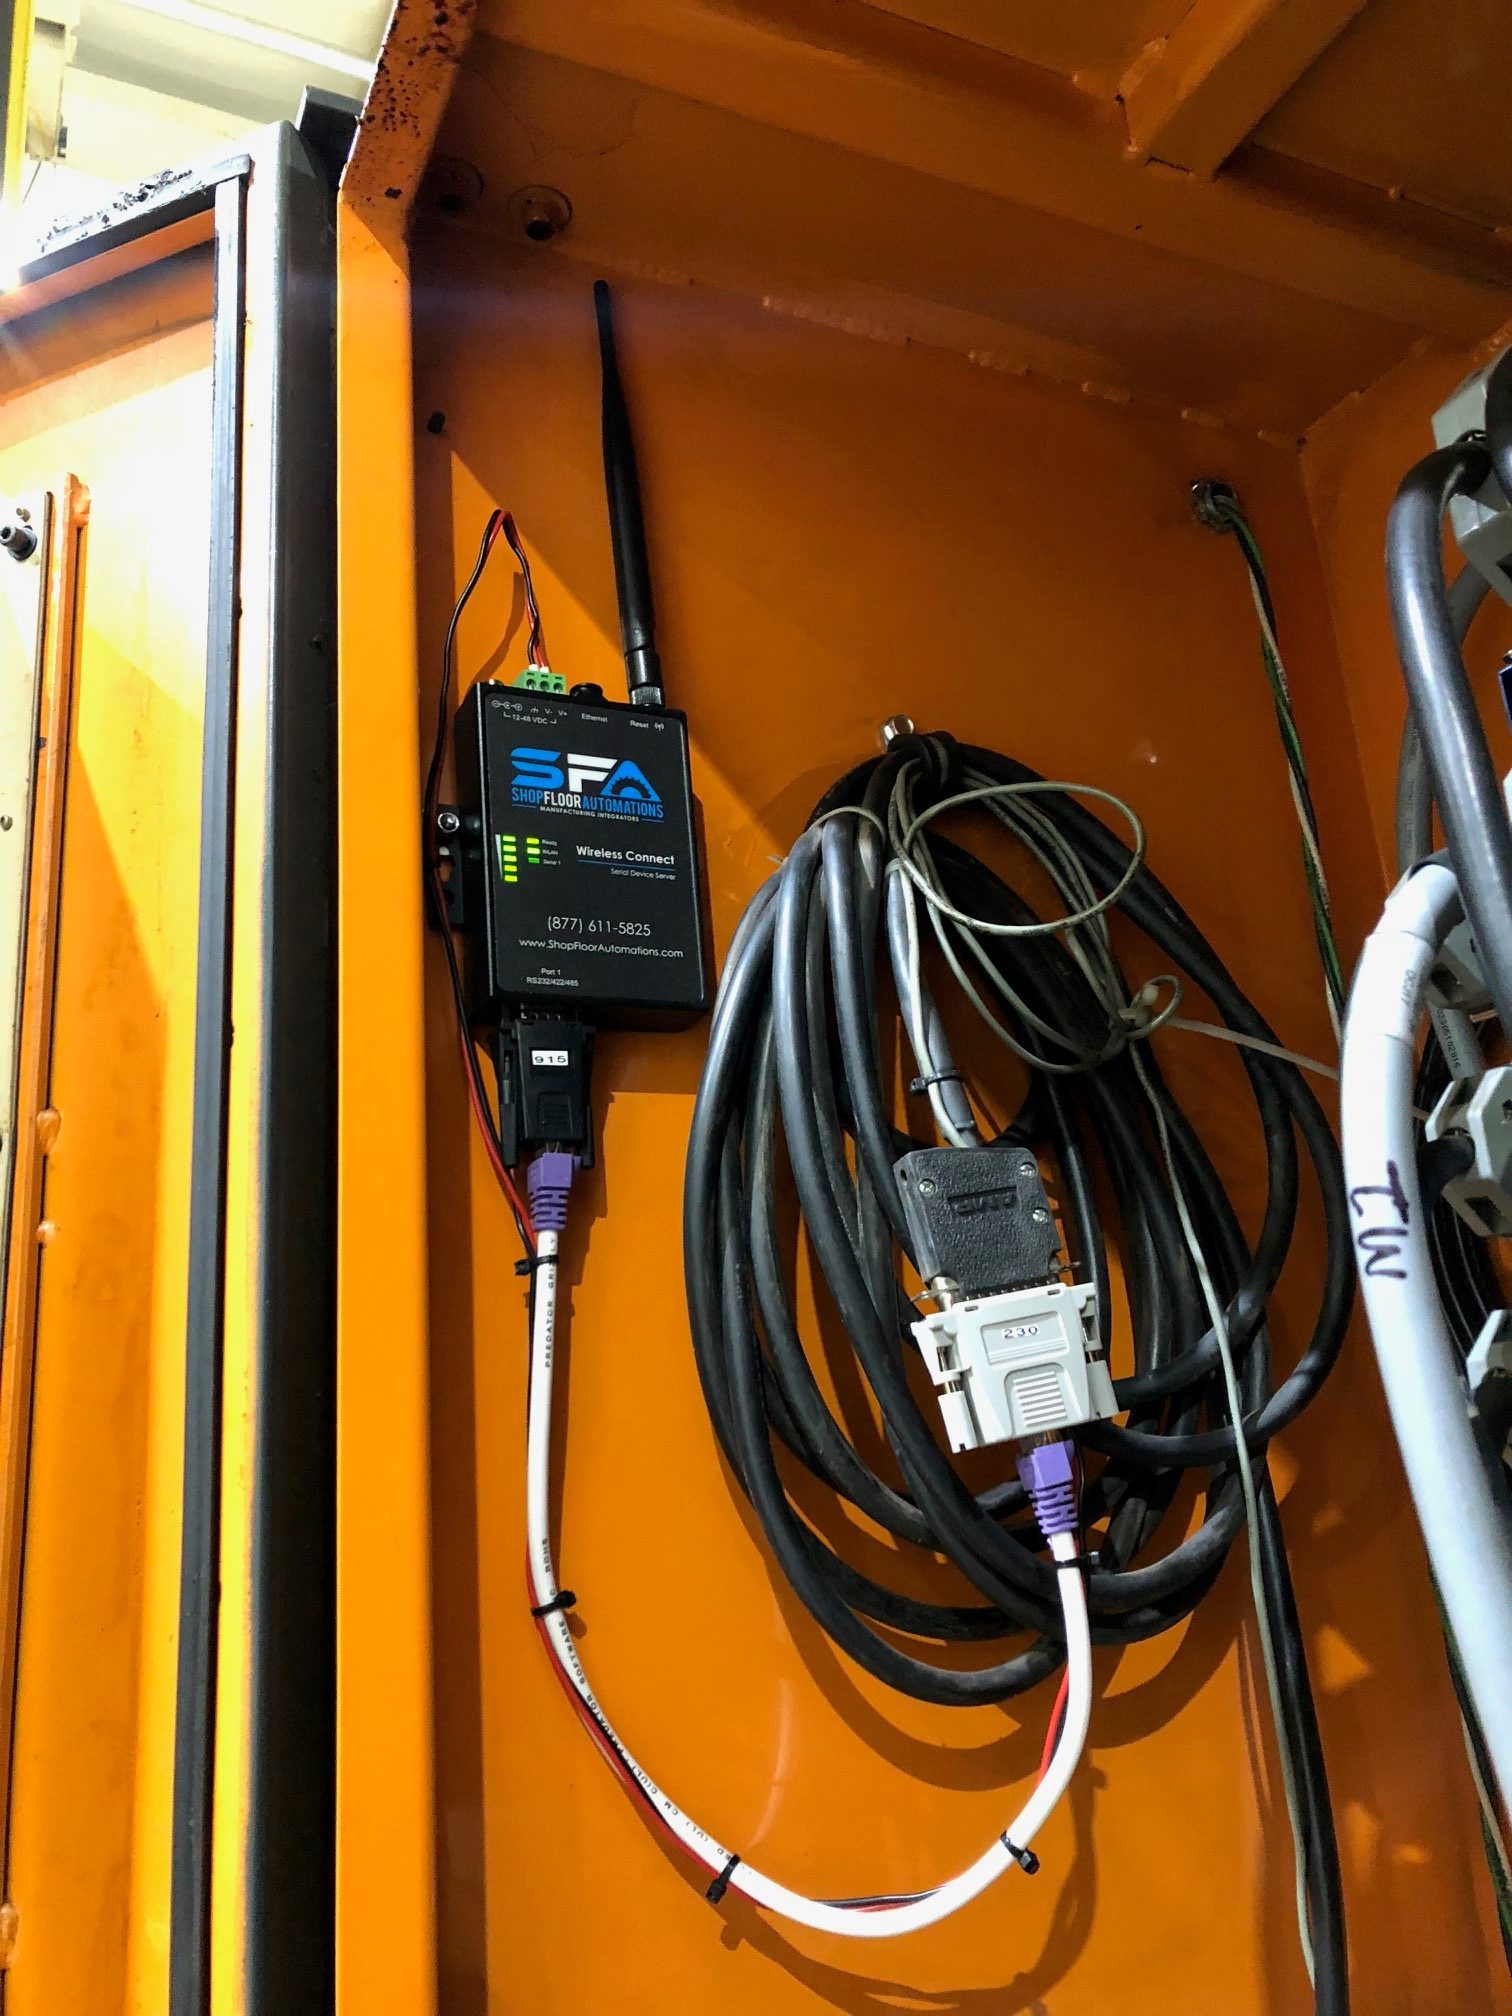 A 1-Port Wireless Connect is mounted to the inside of an orange CNC machine.